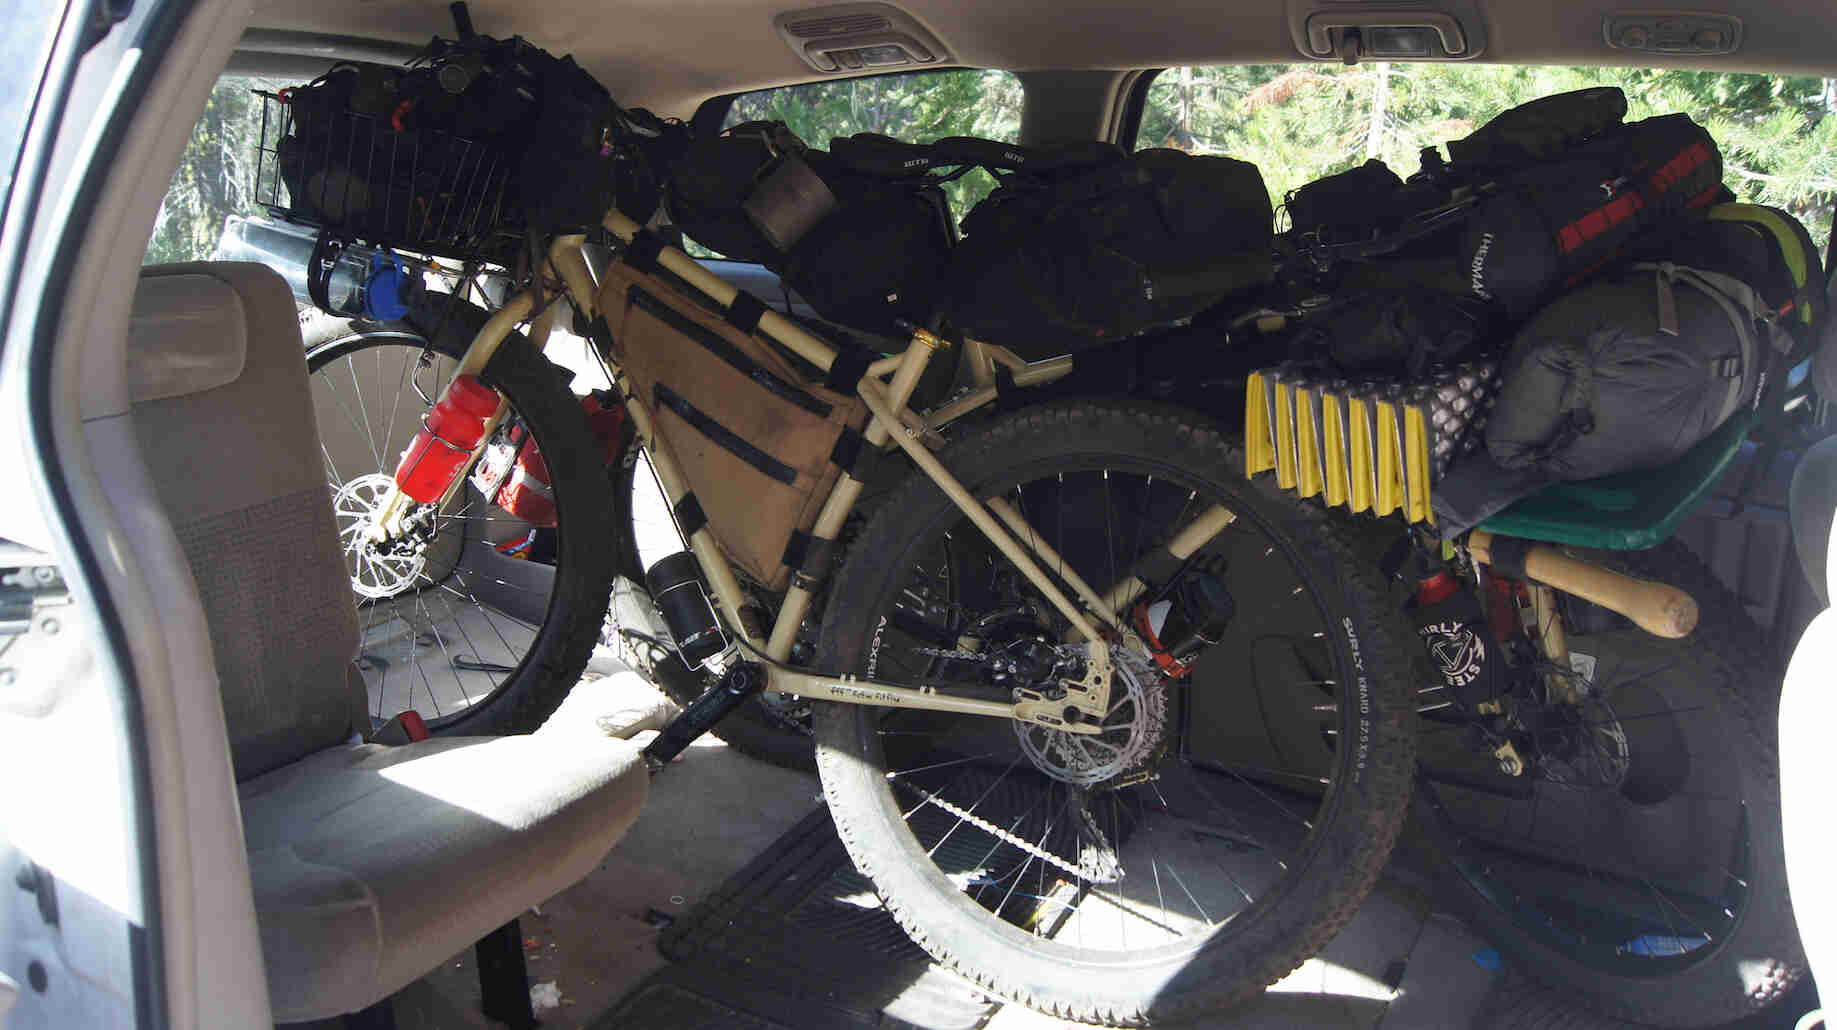 Left side view of a Surly bike, inside of a minivan with camping gear